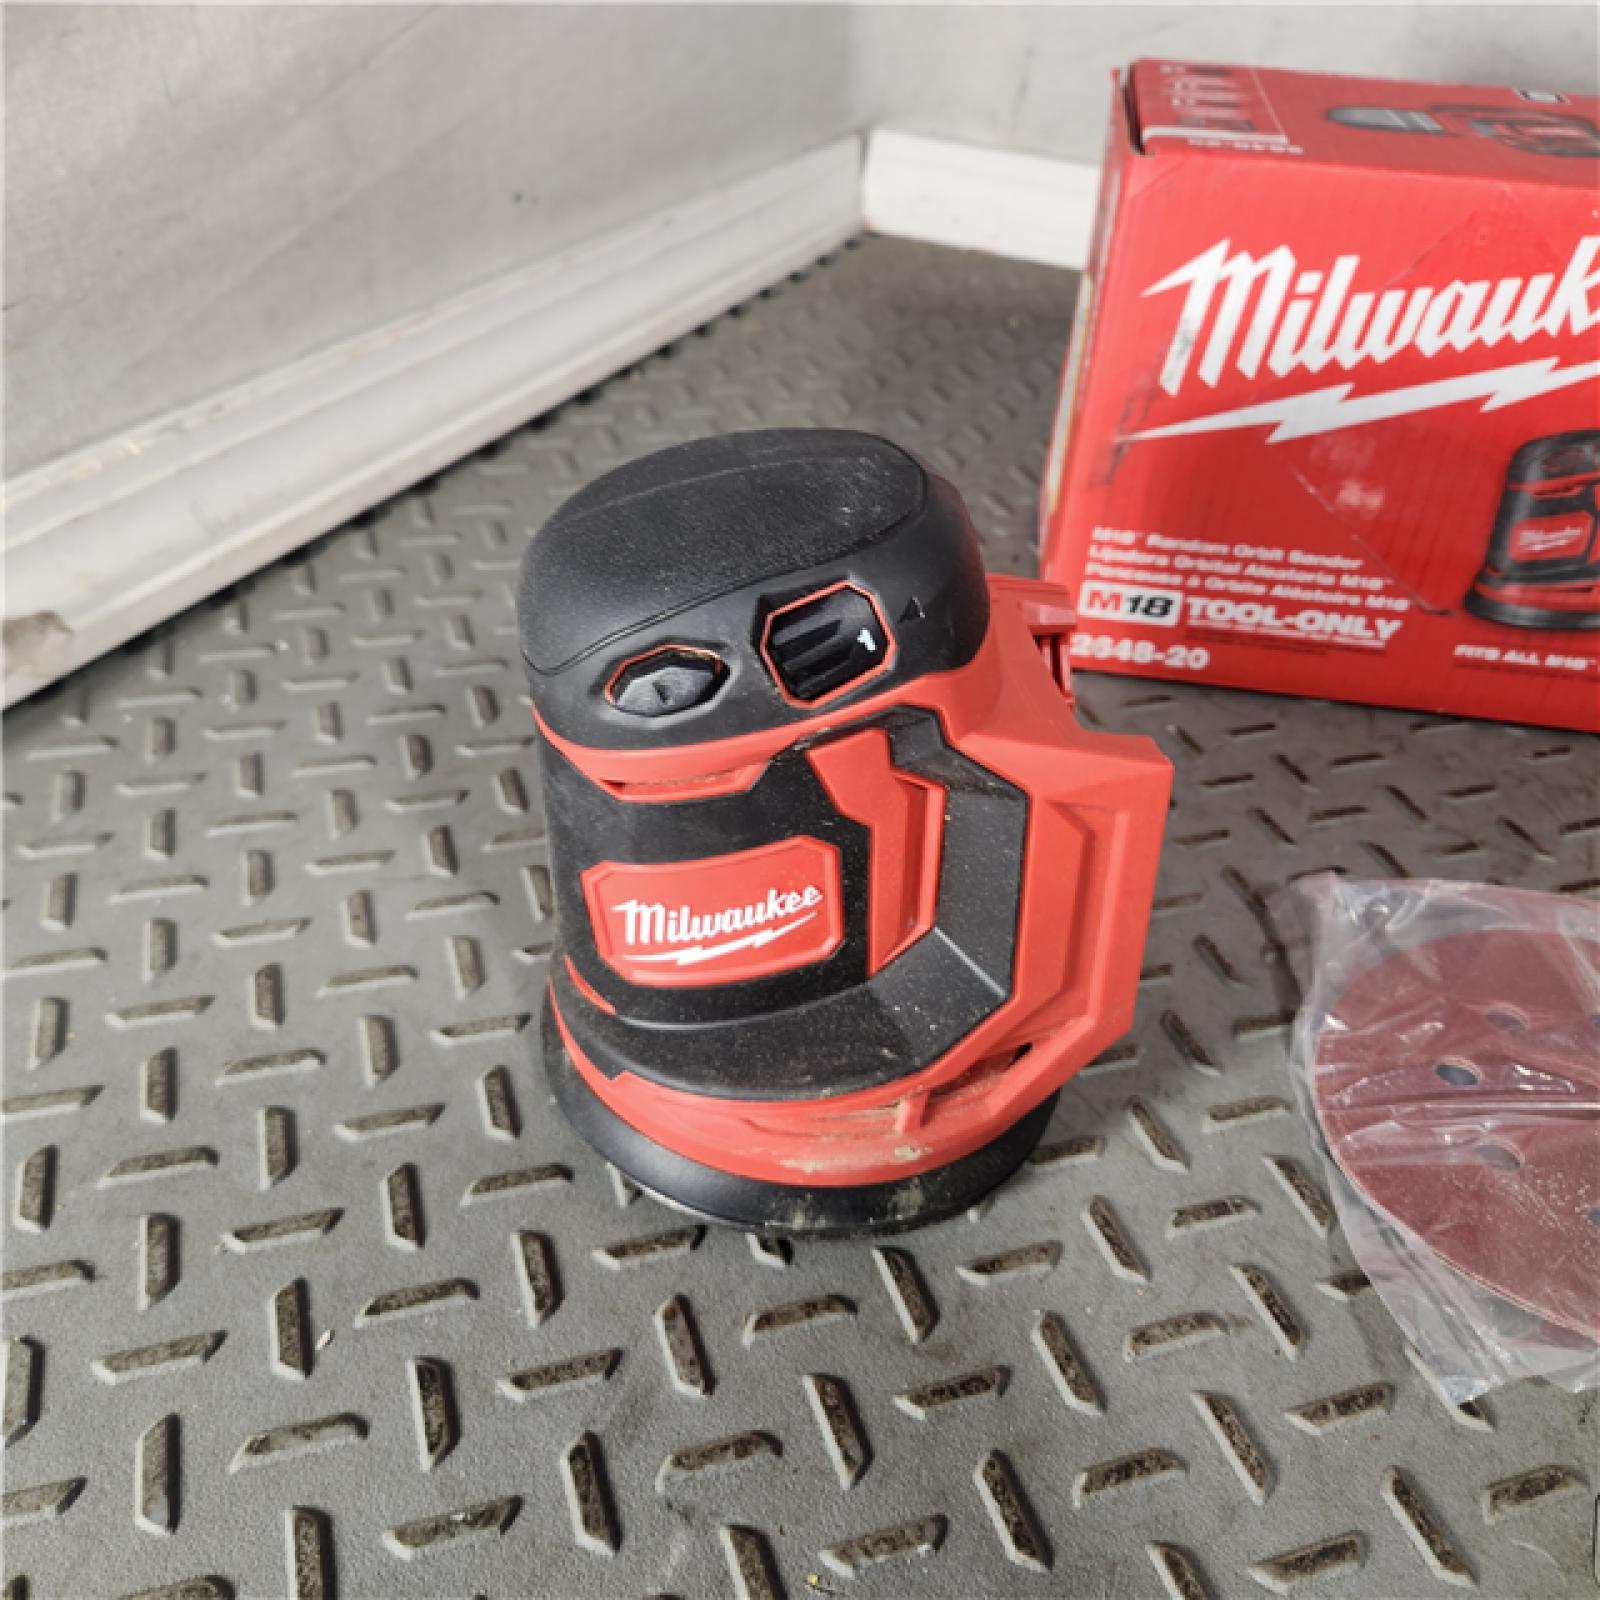 Houston Location - AS-IS Milwaukee 2648-20 - M18 5  7000-12000 Opm Cordless Variable Speed Random Orbital Sander - Appears IN GOOD Condition